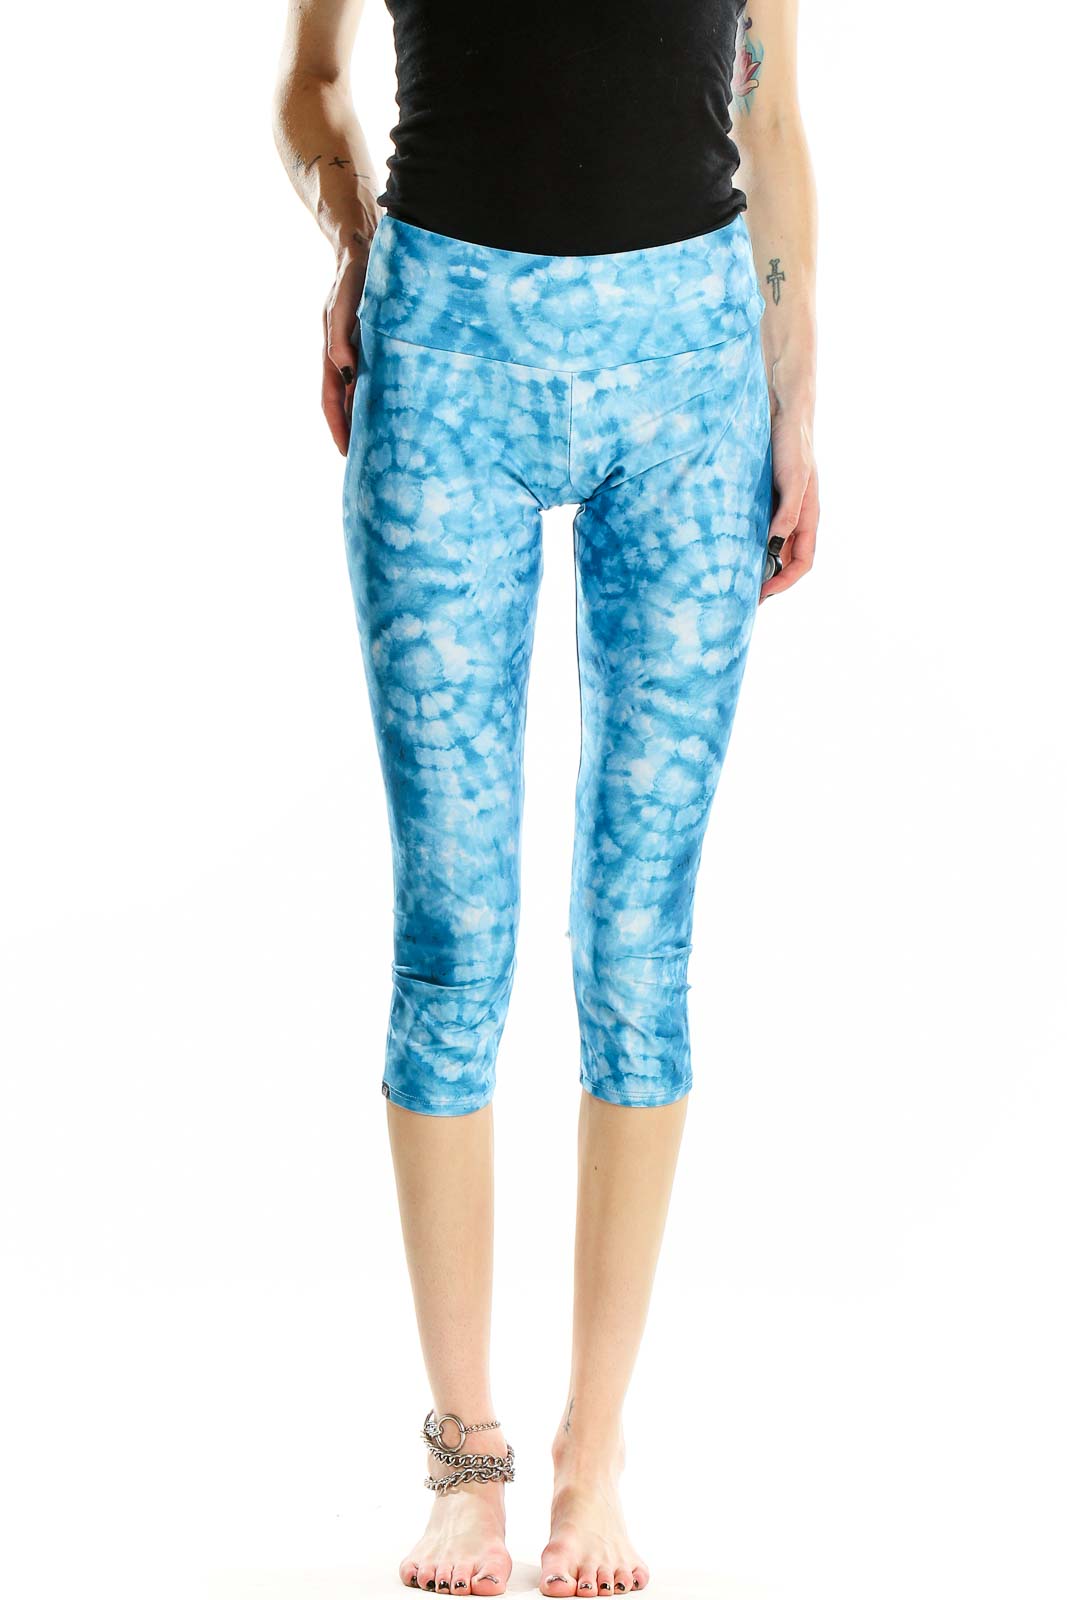 Blue Tie and Dye Leggings Front